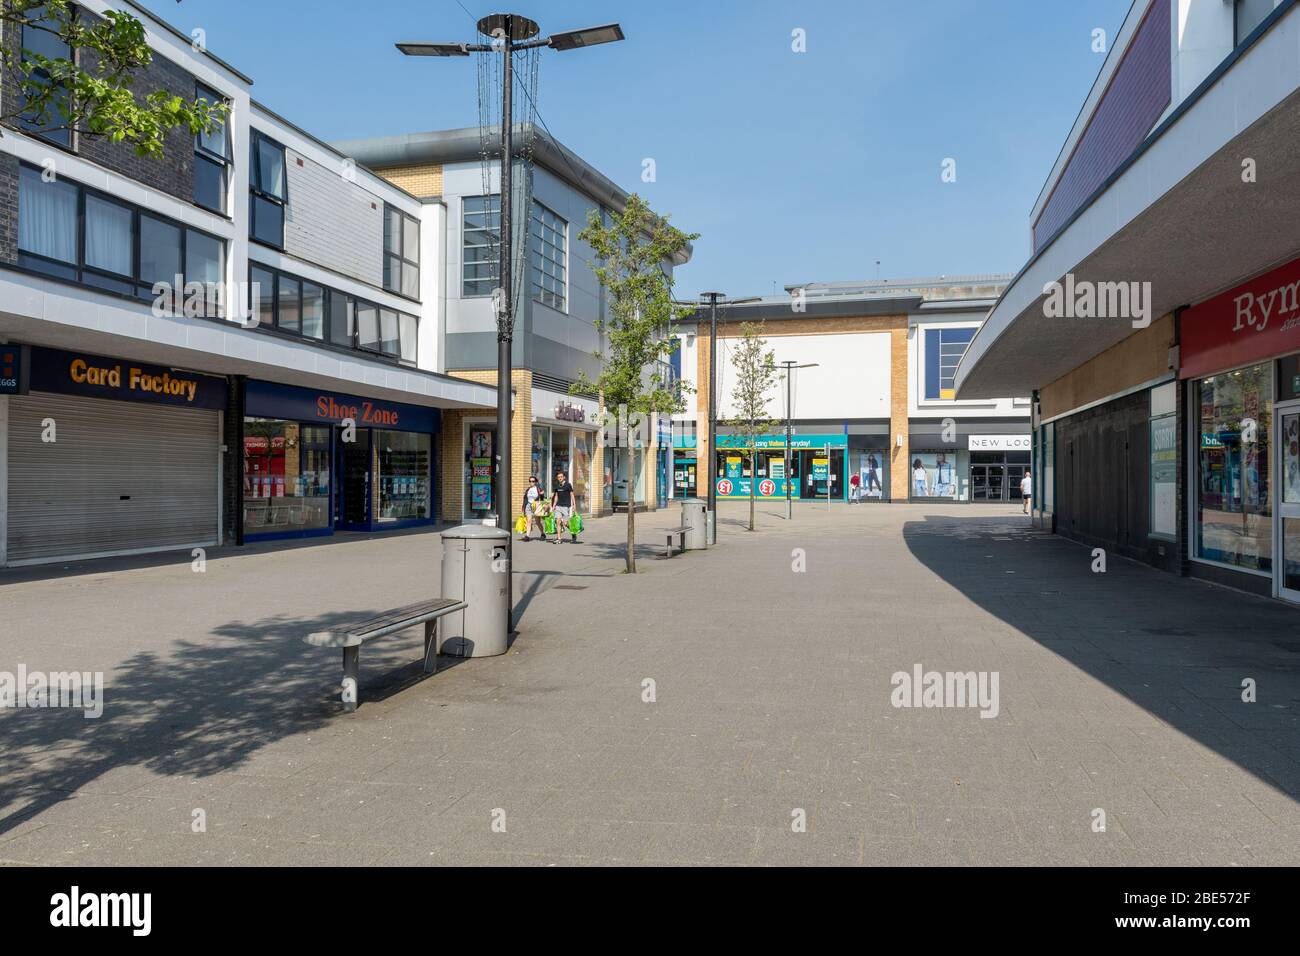 10 April 2020. During the 2020 coronavirus Covid-19 pandemic, a lockdown is in place in the UK, and people are only allowing to go out for specific reasons. Non-essential businesses and shops are shut. In Farnborough town centre, Hampshire, many shops are closed with the shutters down, and it is much more empty then usual with very few people around. Stock Photo